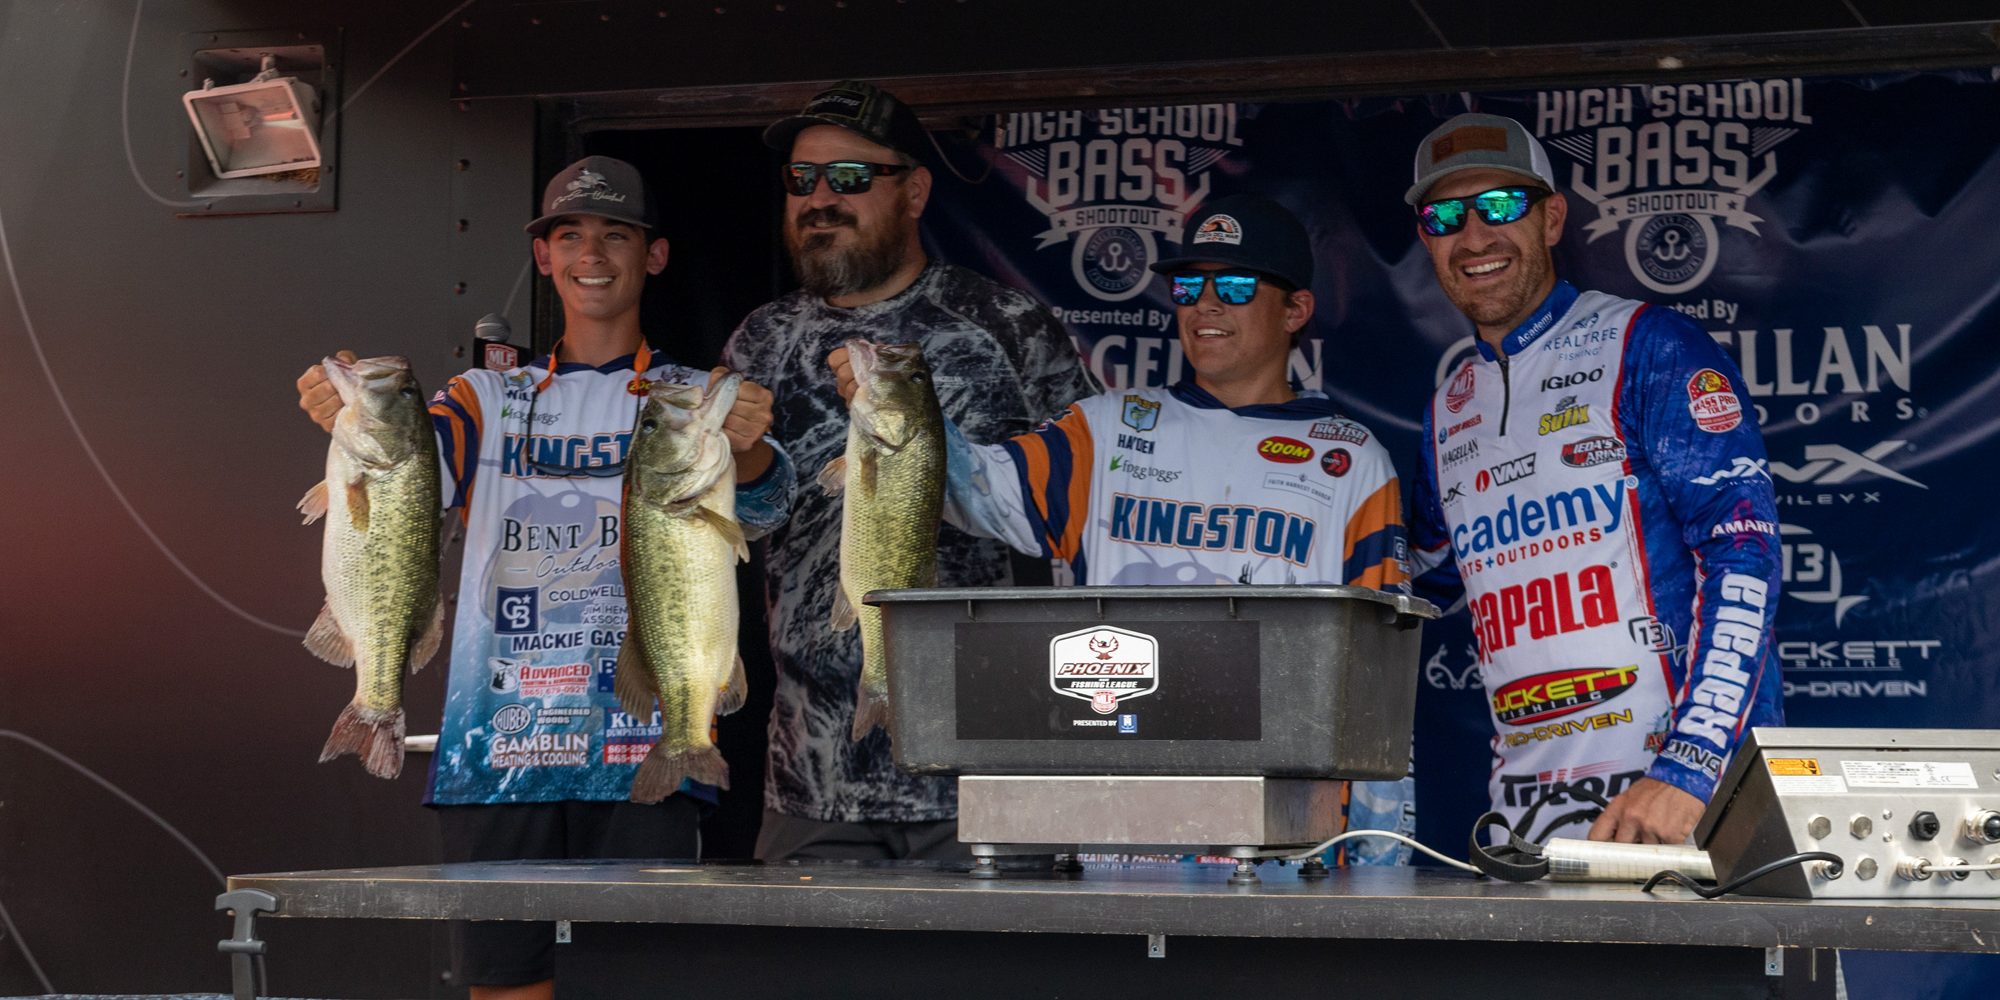 JACOB WHEELER: Turning Competition into Education With High School Bass  Shootout - Major League Fishing